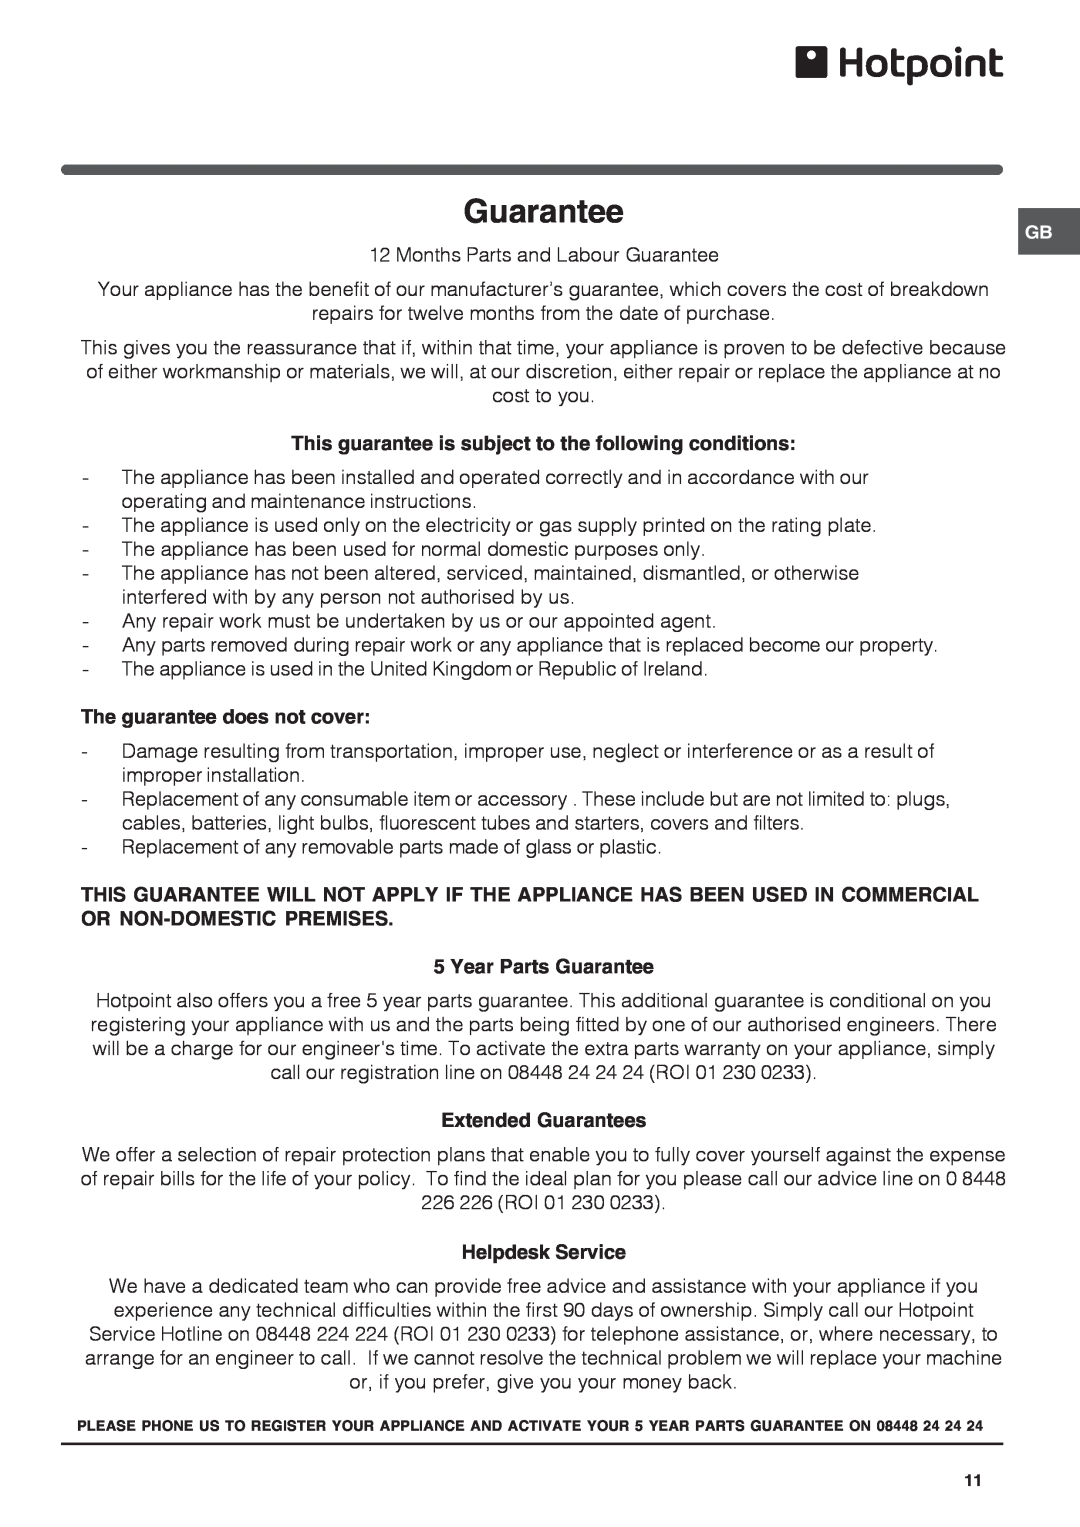 Hotpoint RFA52 manual Guarantee, This guarantee is subject to the following conditions, The guarantee does not cover 